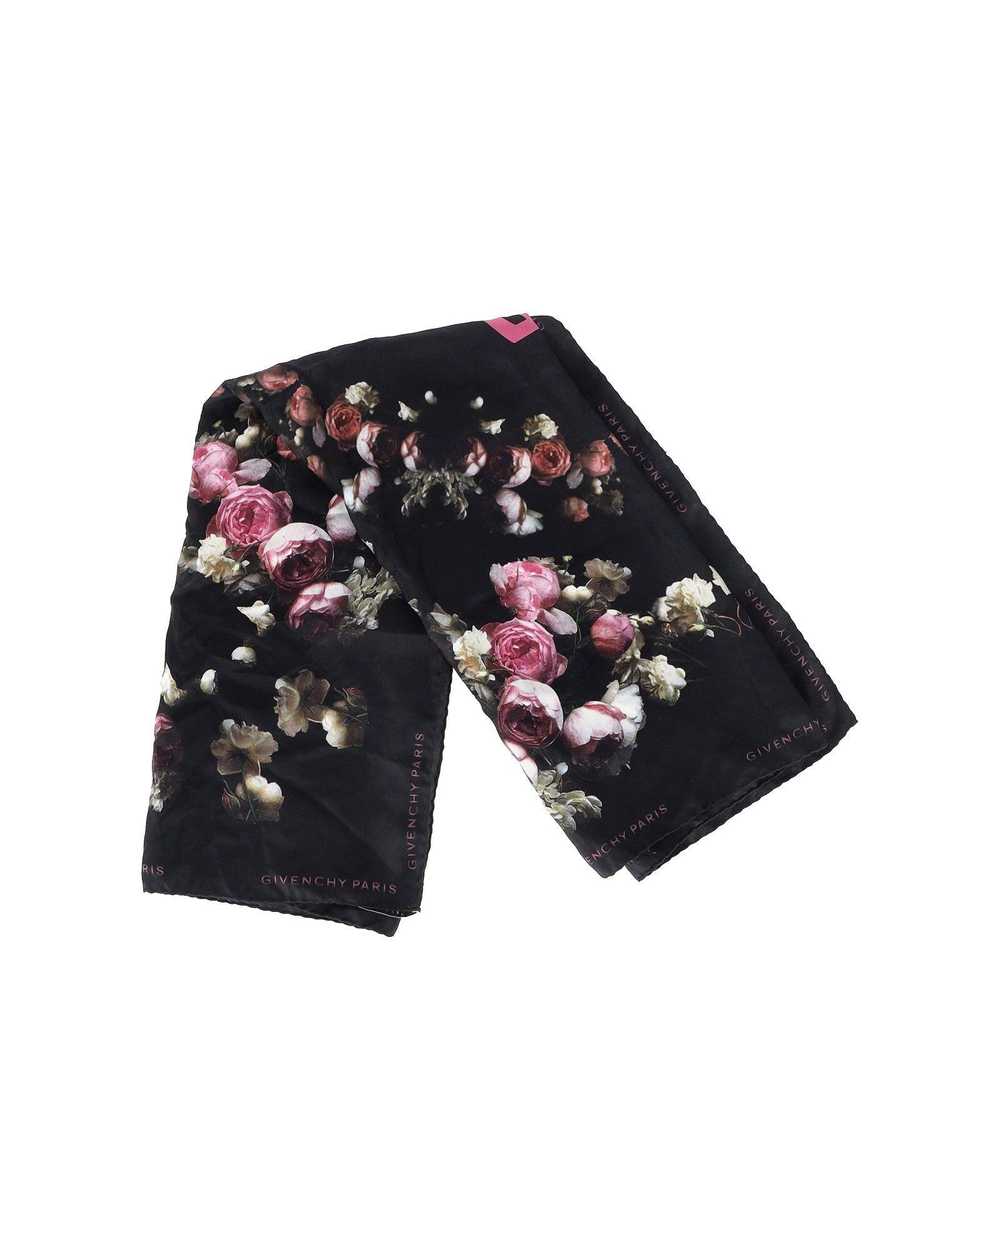 Product Details Givenchy Black Floral Silk Scarf - image 3